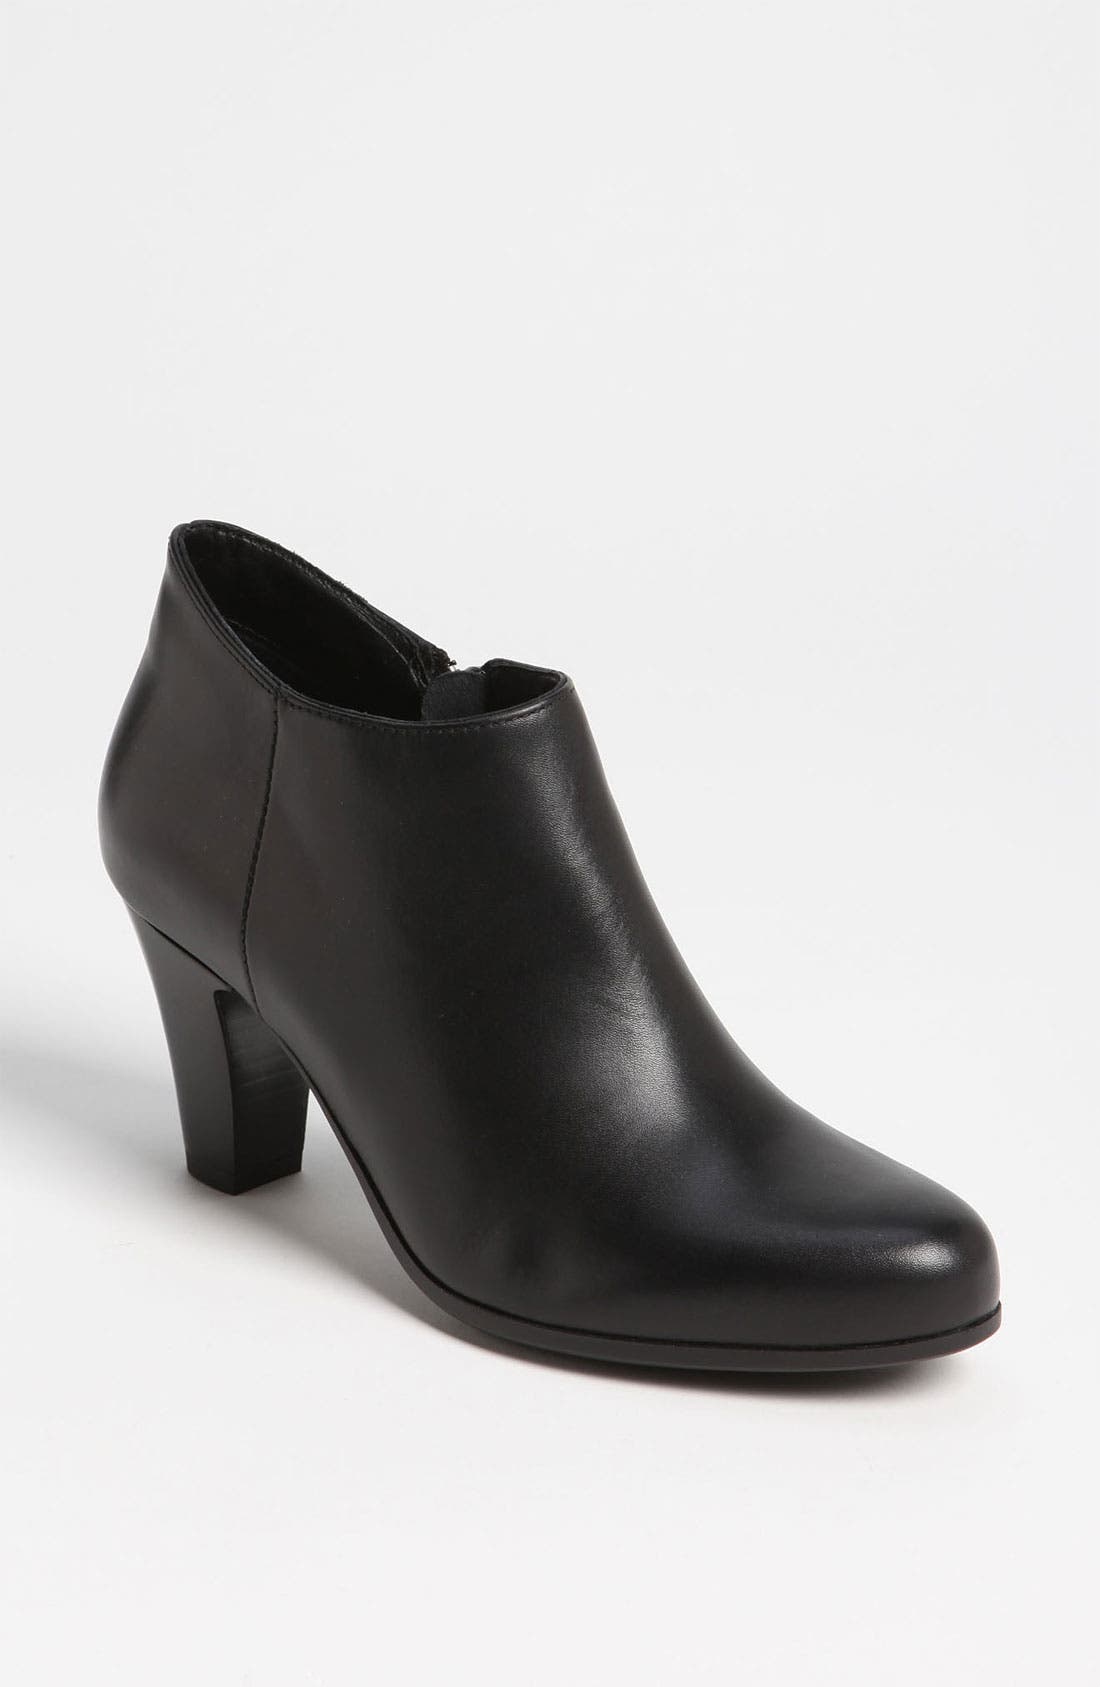 la canadienne boots nordstrom